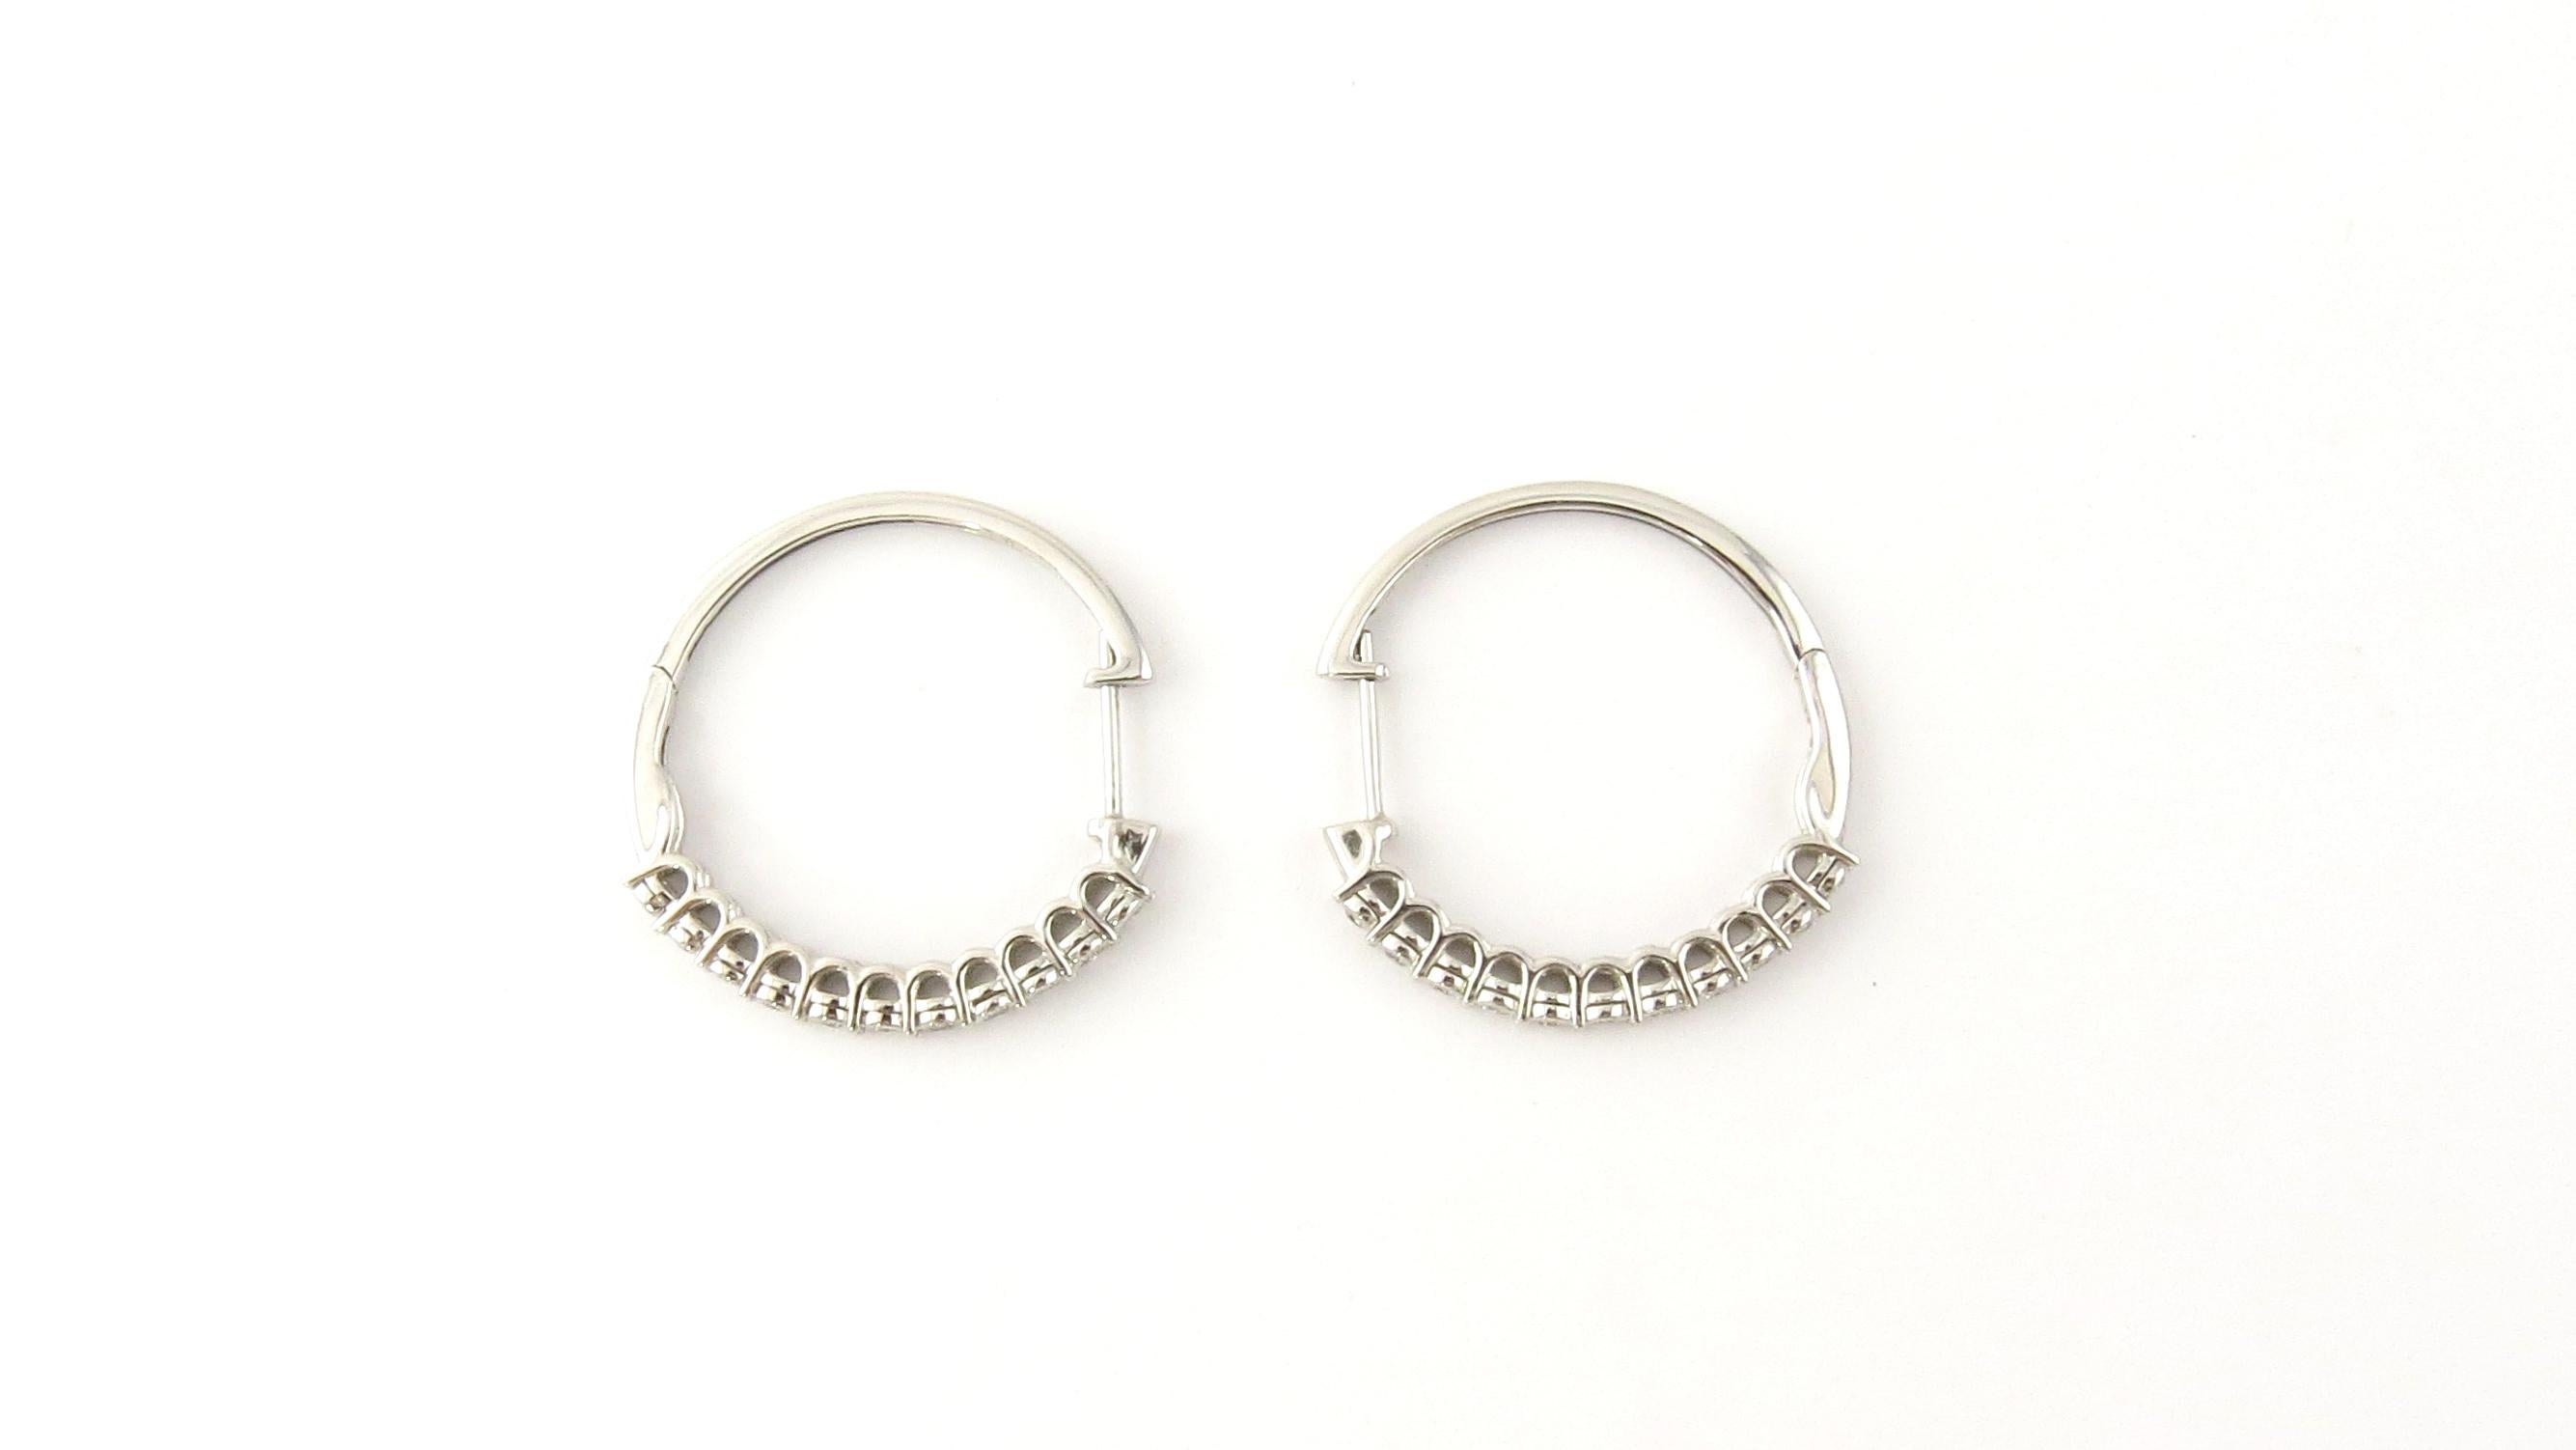 Vintage 10 Karat White Gold Diamond Hoop Earrings

These eye-catching hinged hoop earrings each features 11 round full cut diamonds set in classic 10K white gold.

Approximate total diamond weight: .50 ct.

Diamond color: J-K

Diamond clarity: